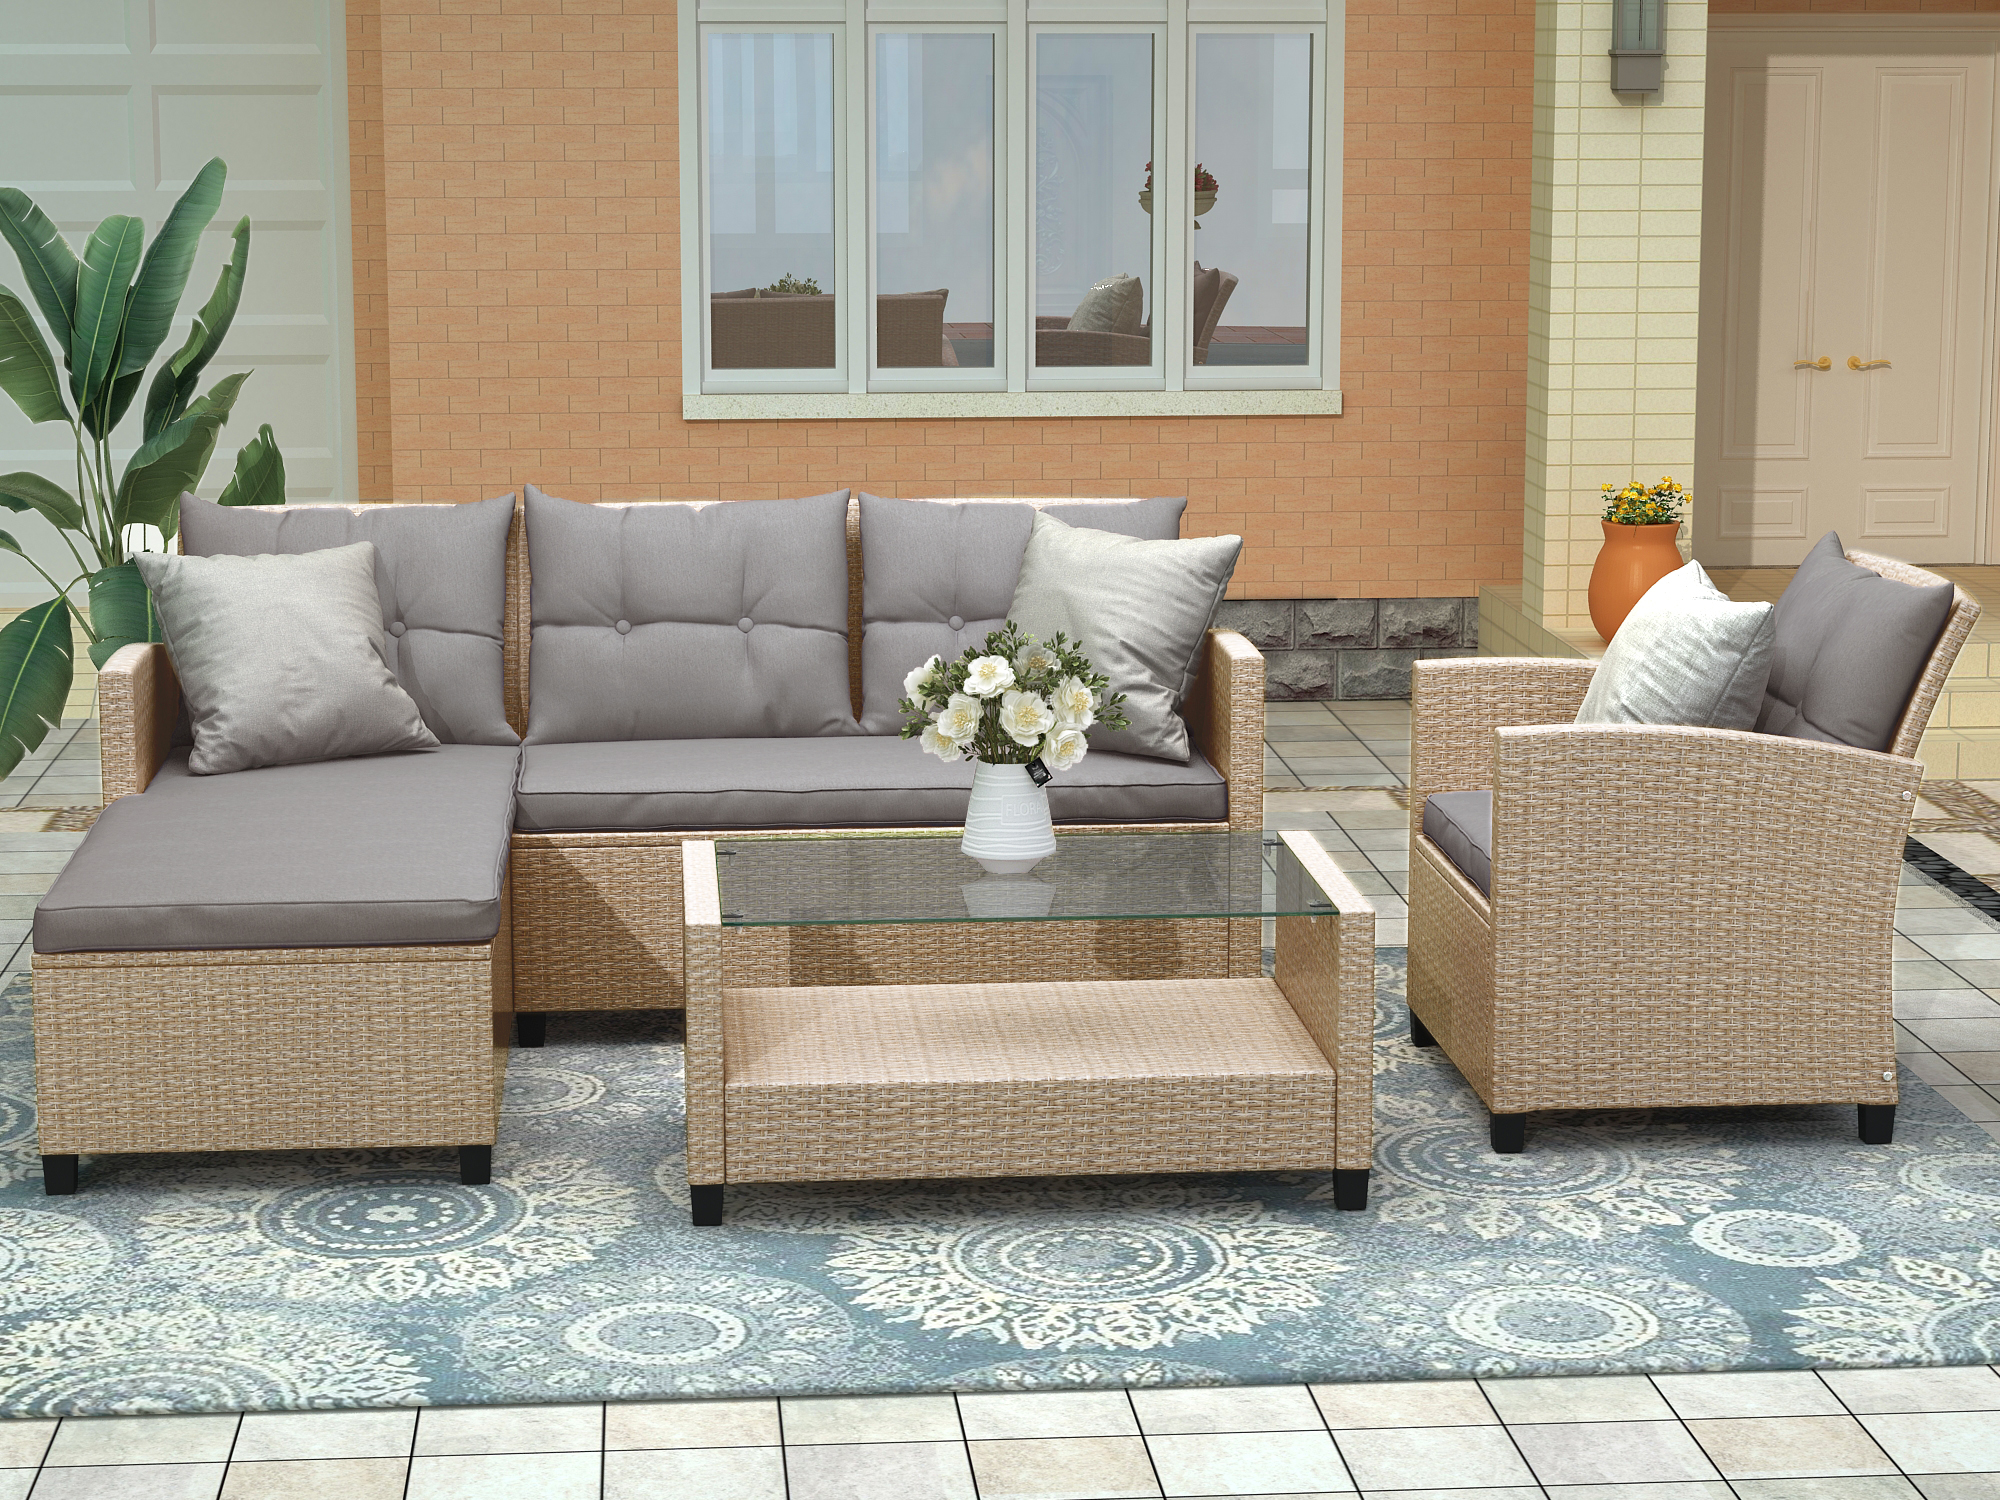 Outdoor Garden Patio Sectional Sofa Sets, SEGMART 4 Pieces Modern Wicker Furniture Set with Storage Tempered Glass Coffee Table, Armchair, Conversation Sets for Porch Poolside Backyard, S1497 - image 1 of 9